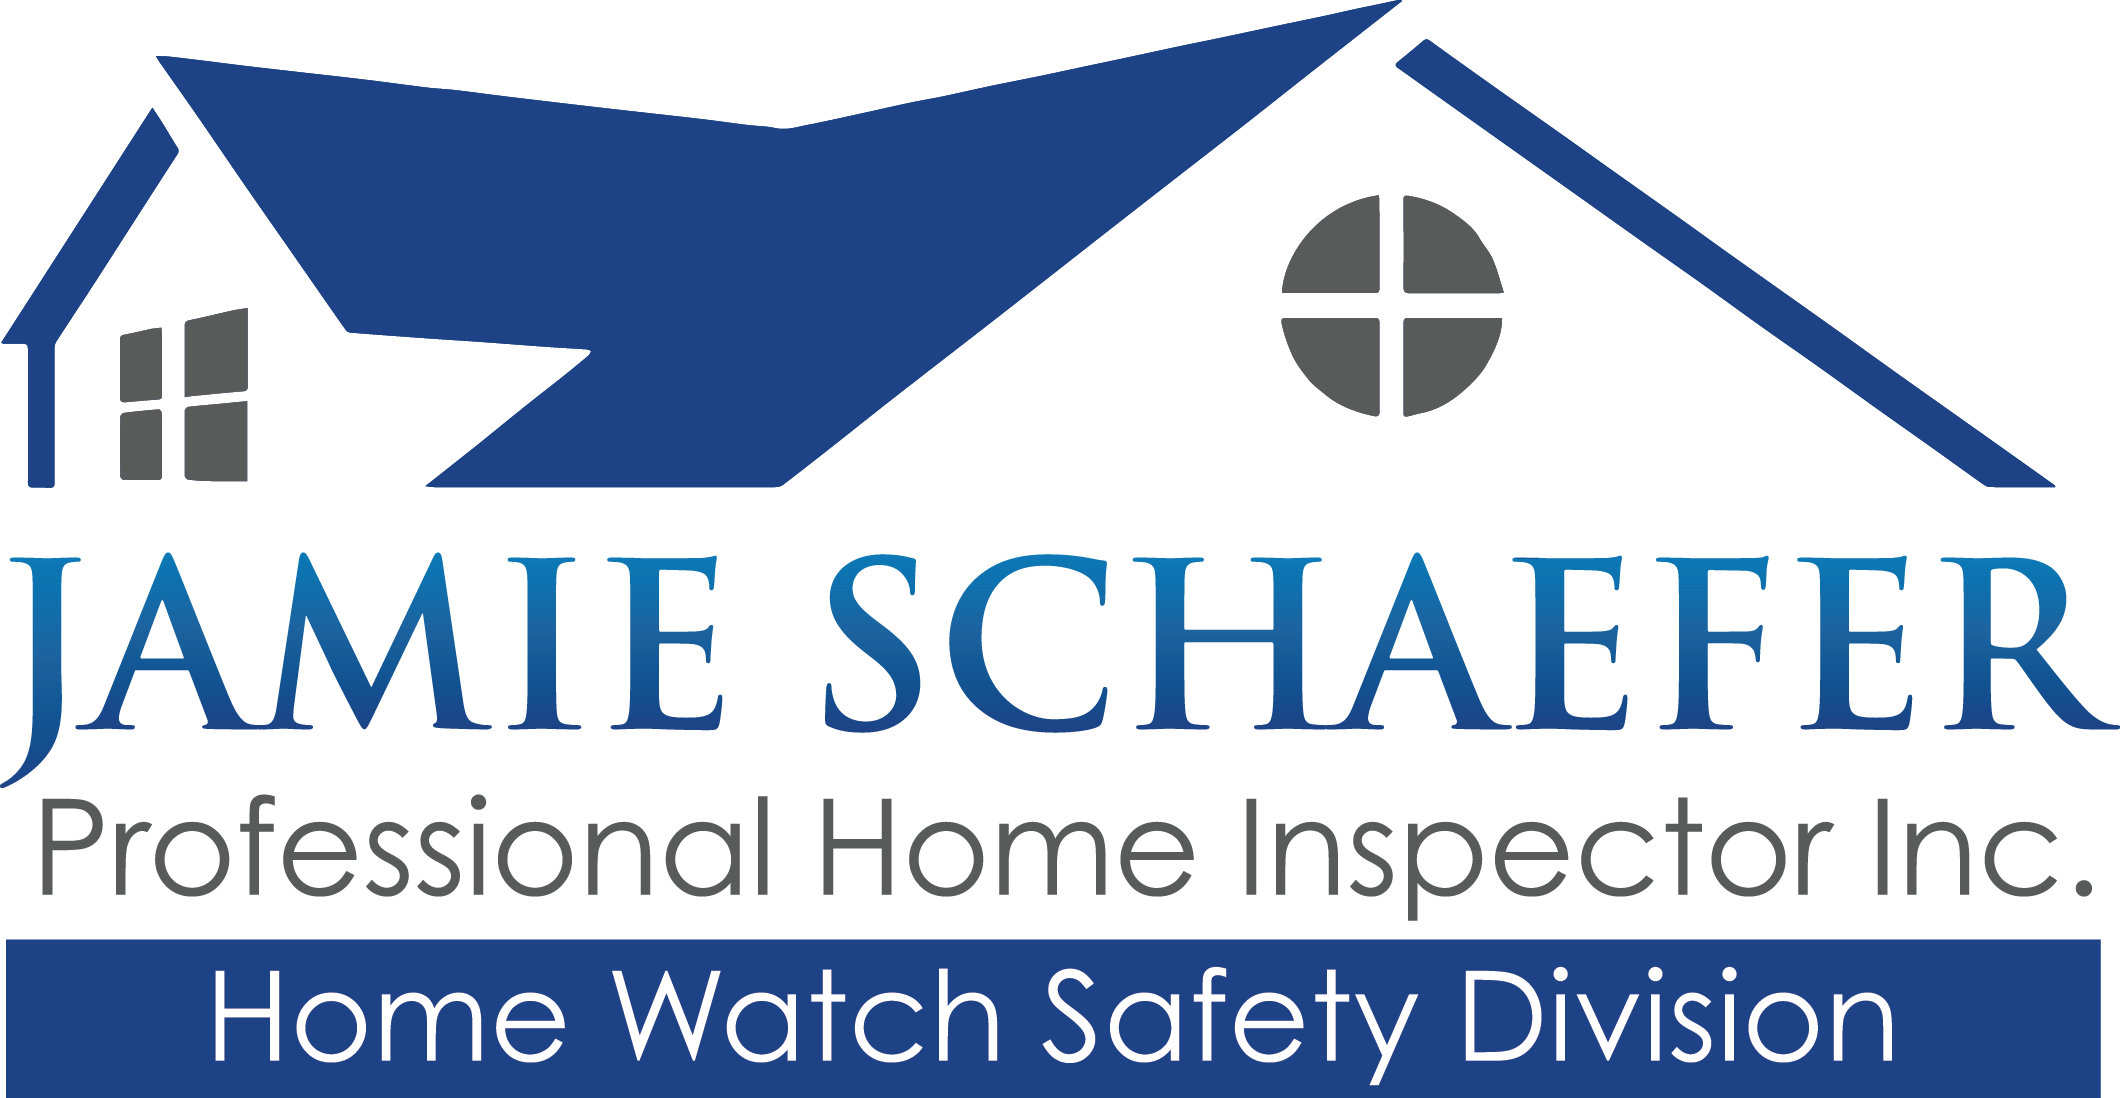 Home Watch Safety Division Logo